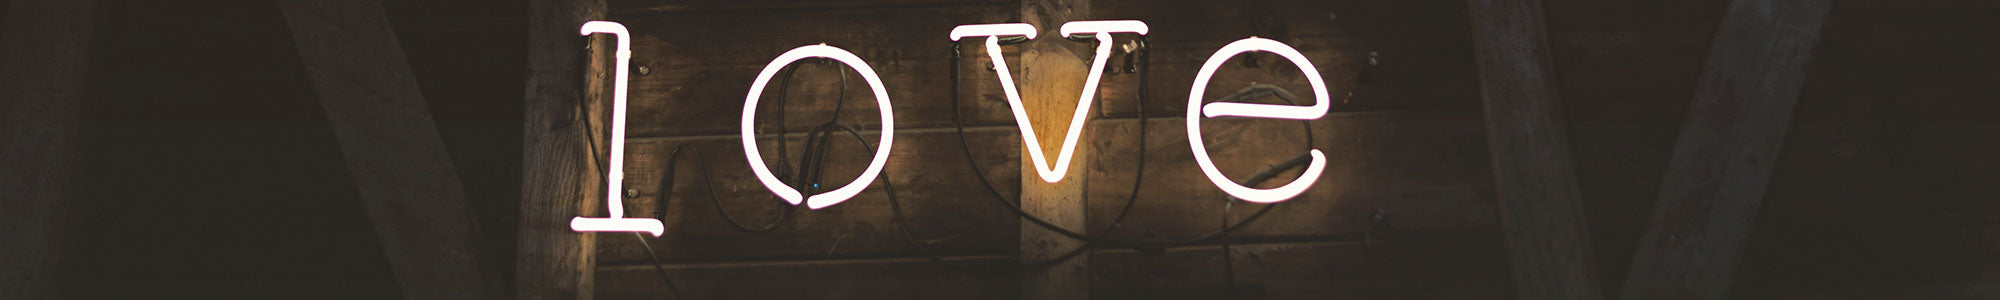 condoms sign love in neon letters